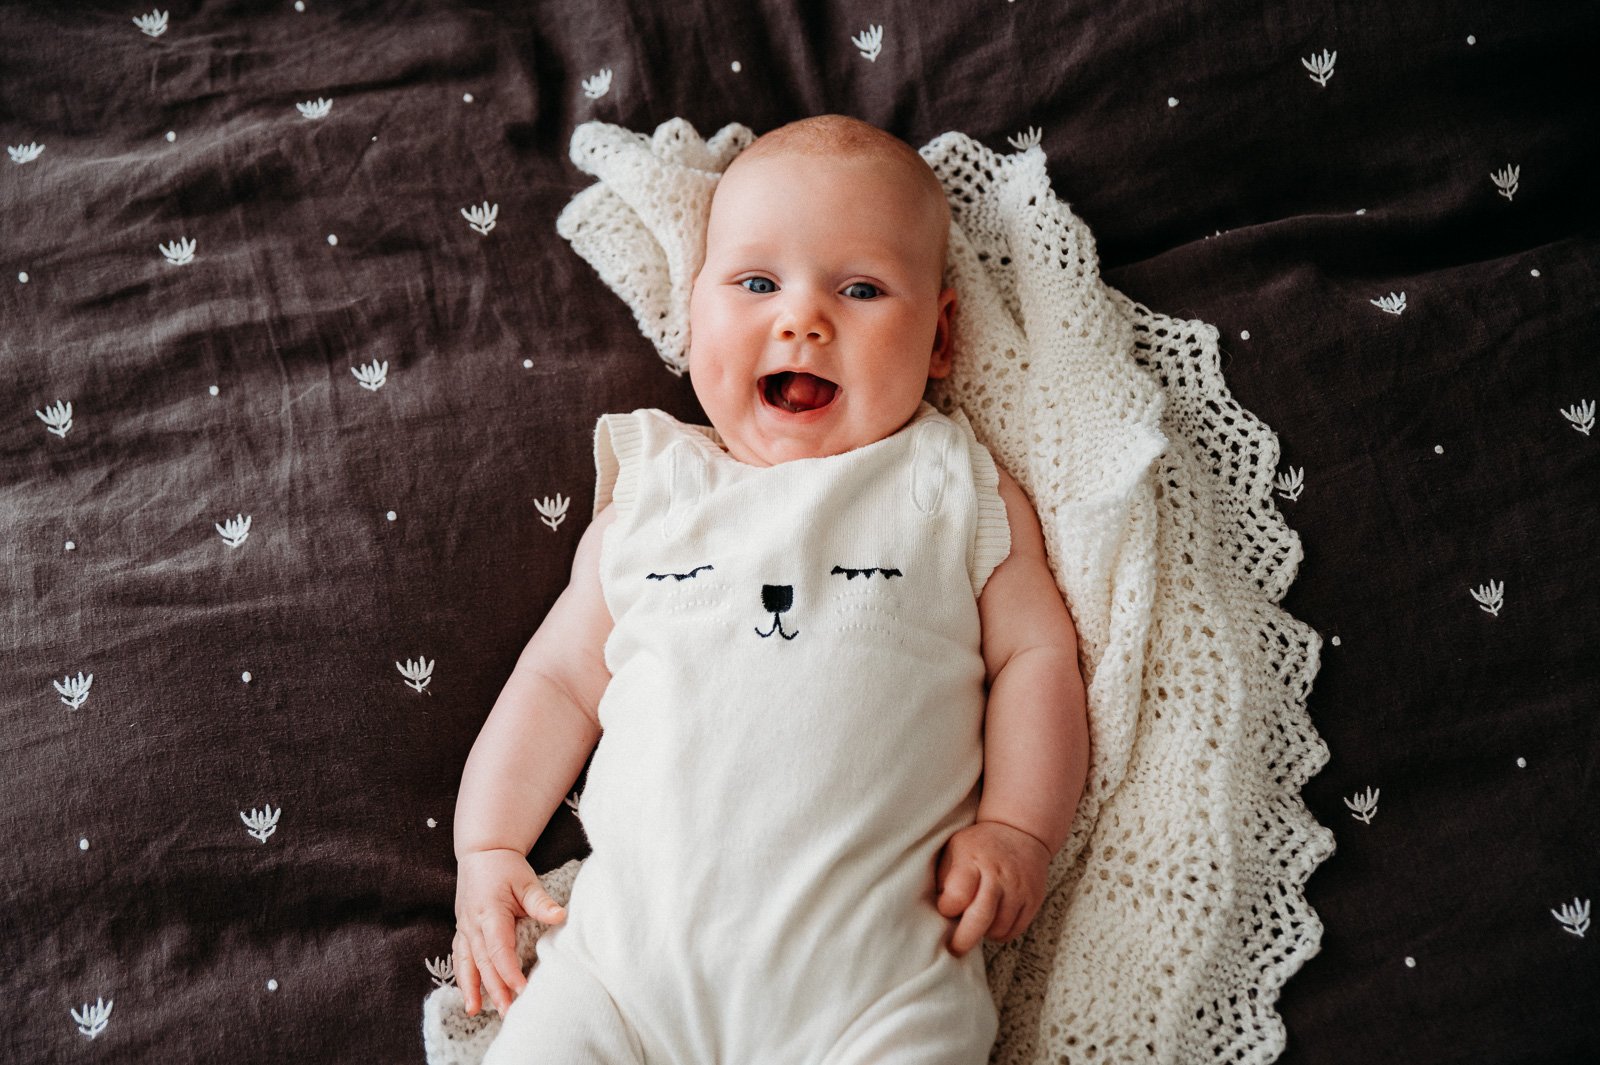 baby_smiling_at_home_on_bed_from_above_melbourne_newborn_family_photographer_lifestyle-1.jpg